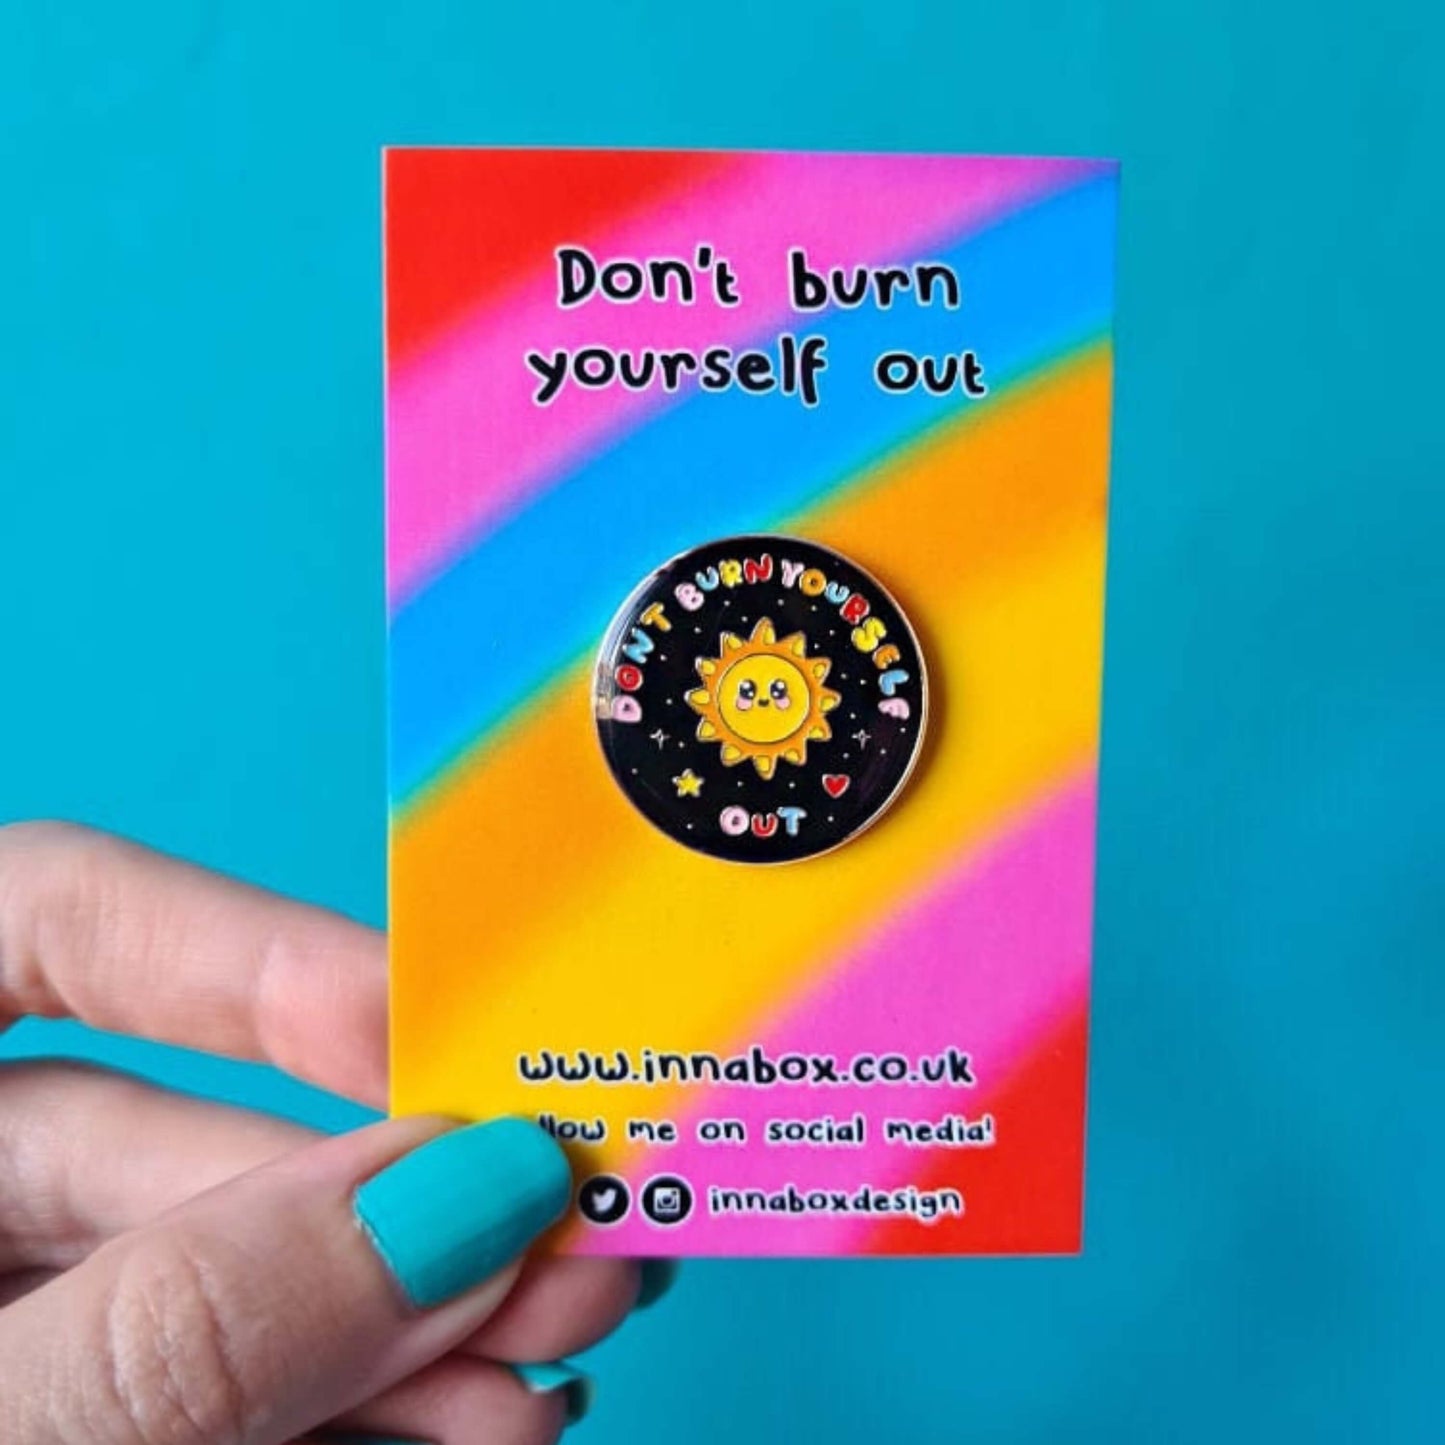 The Don't Burn Yourself Out Sunshine Enamel Pin on rainbow backing card with black top text reading 'don't burn yourself out' and bottom black text of the innabox website and social media handles, being held over a blue background. Circle shaped pin badge is a black base with a yellow smiling sunshine in the centre with rainbow text surrounding it reading 'don't burn yourself out' along with a red heart, yellow star and silver sparkles. The design was created as a gentle reminder to practise self care.